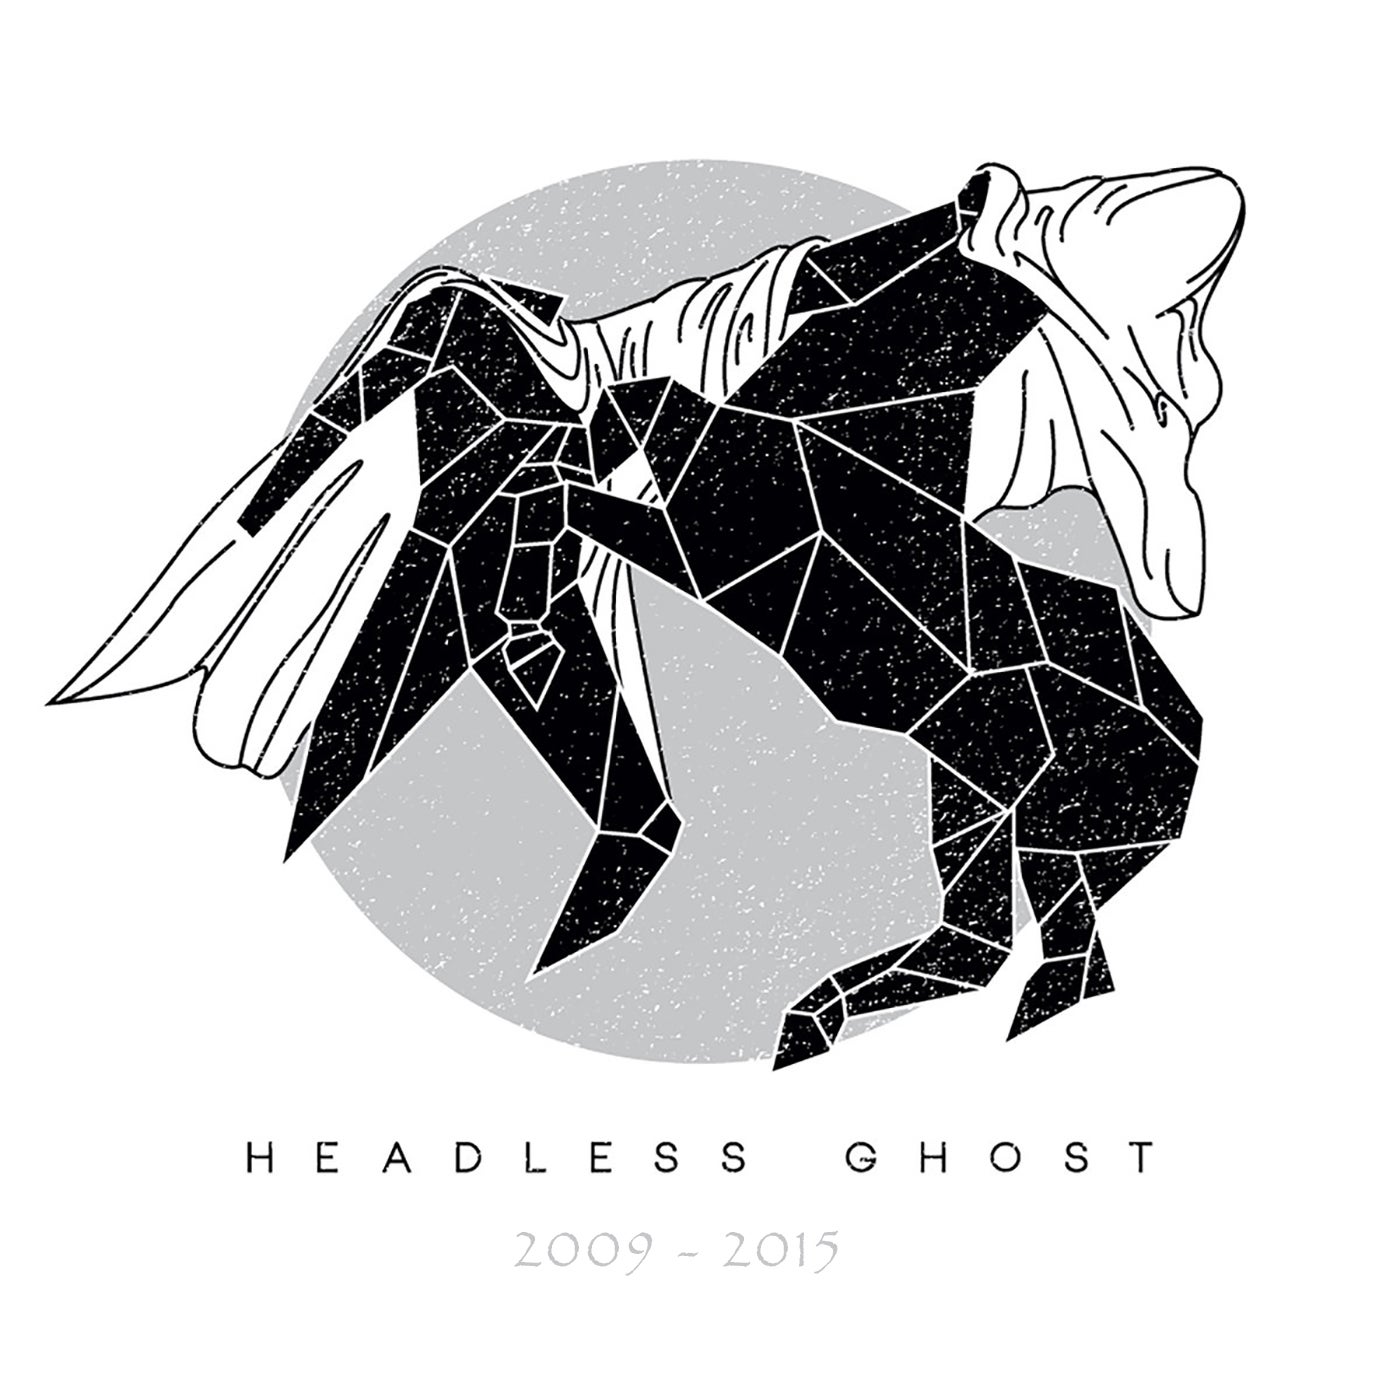 Ripperton presents Headless Ghost: The Series 2009-2015